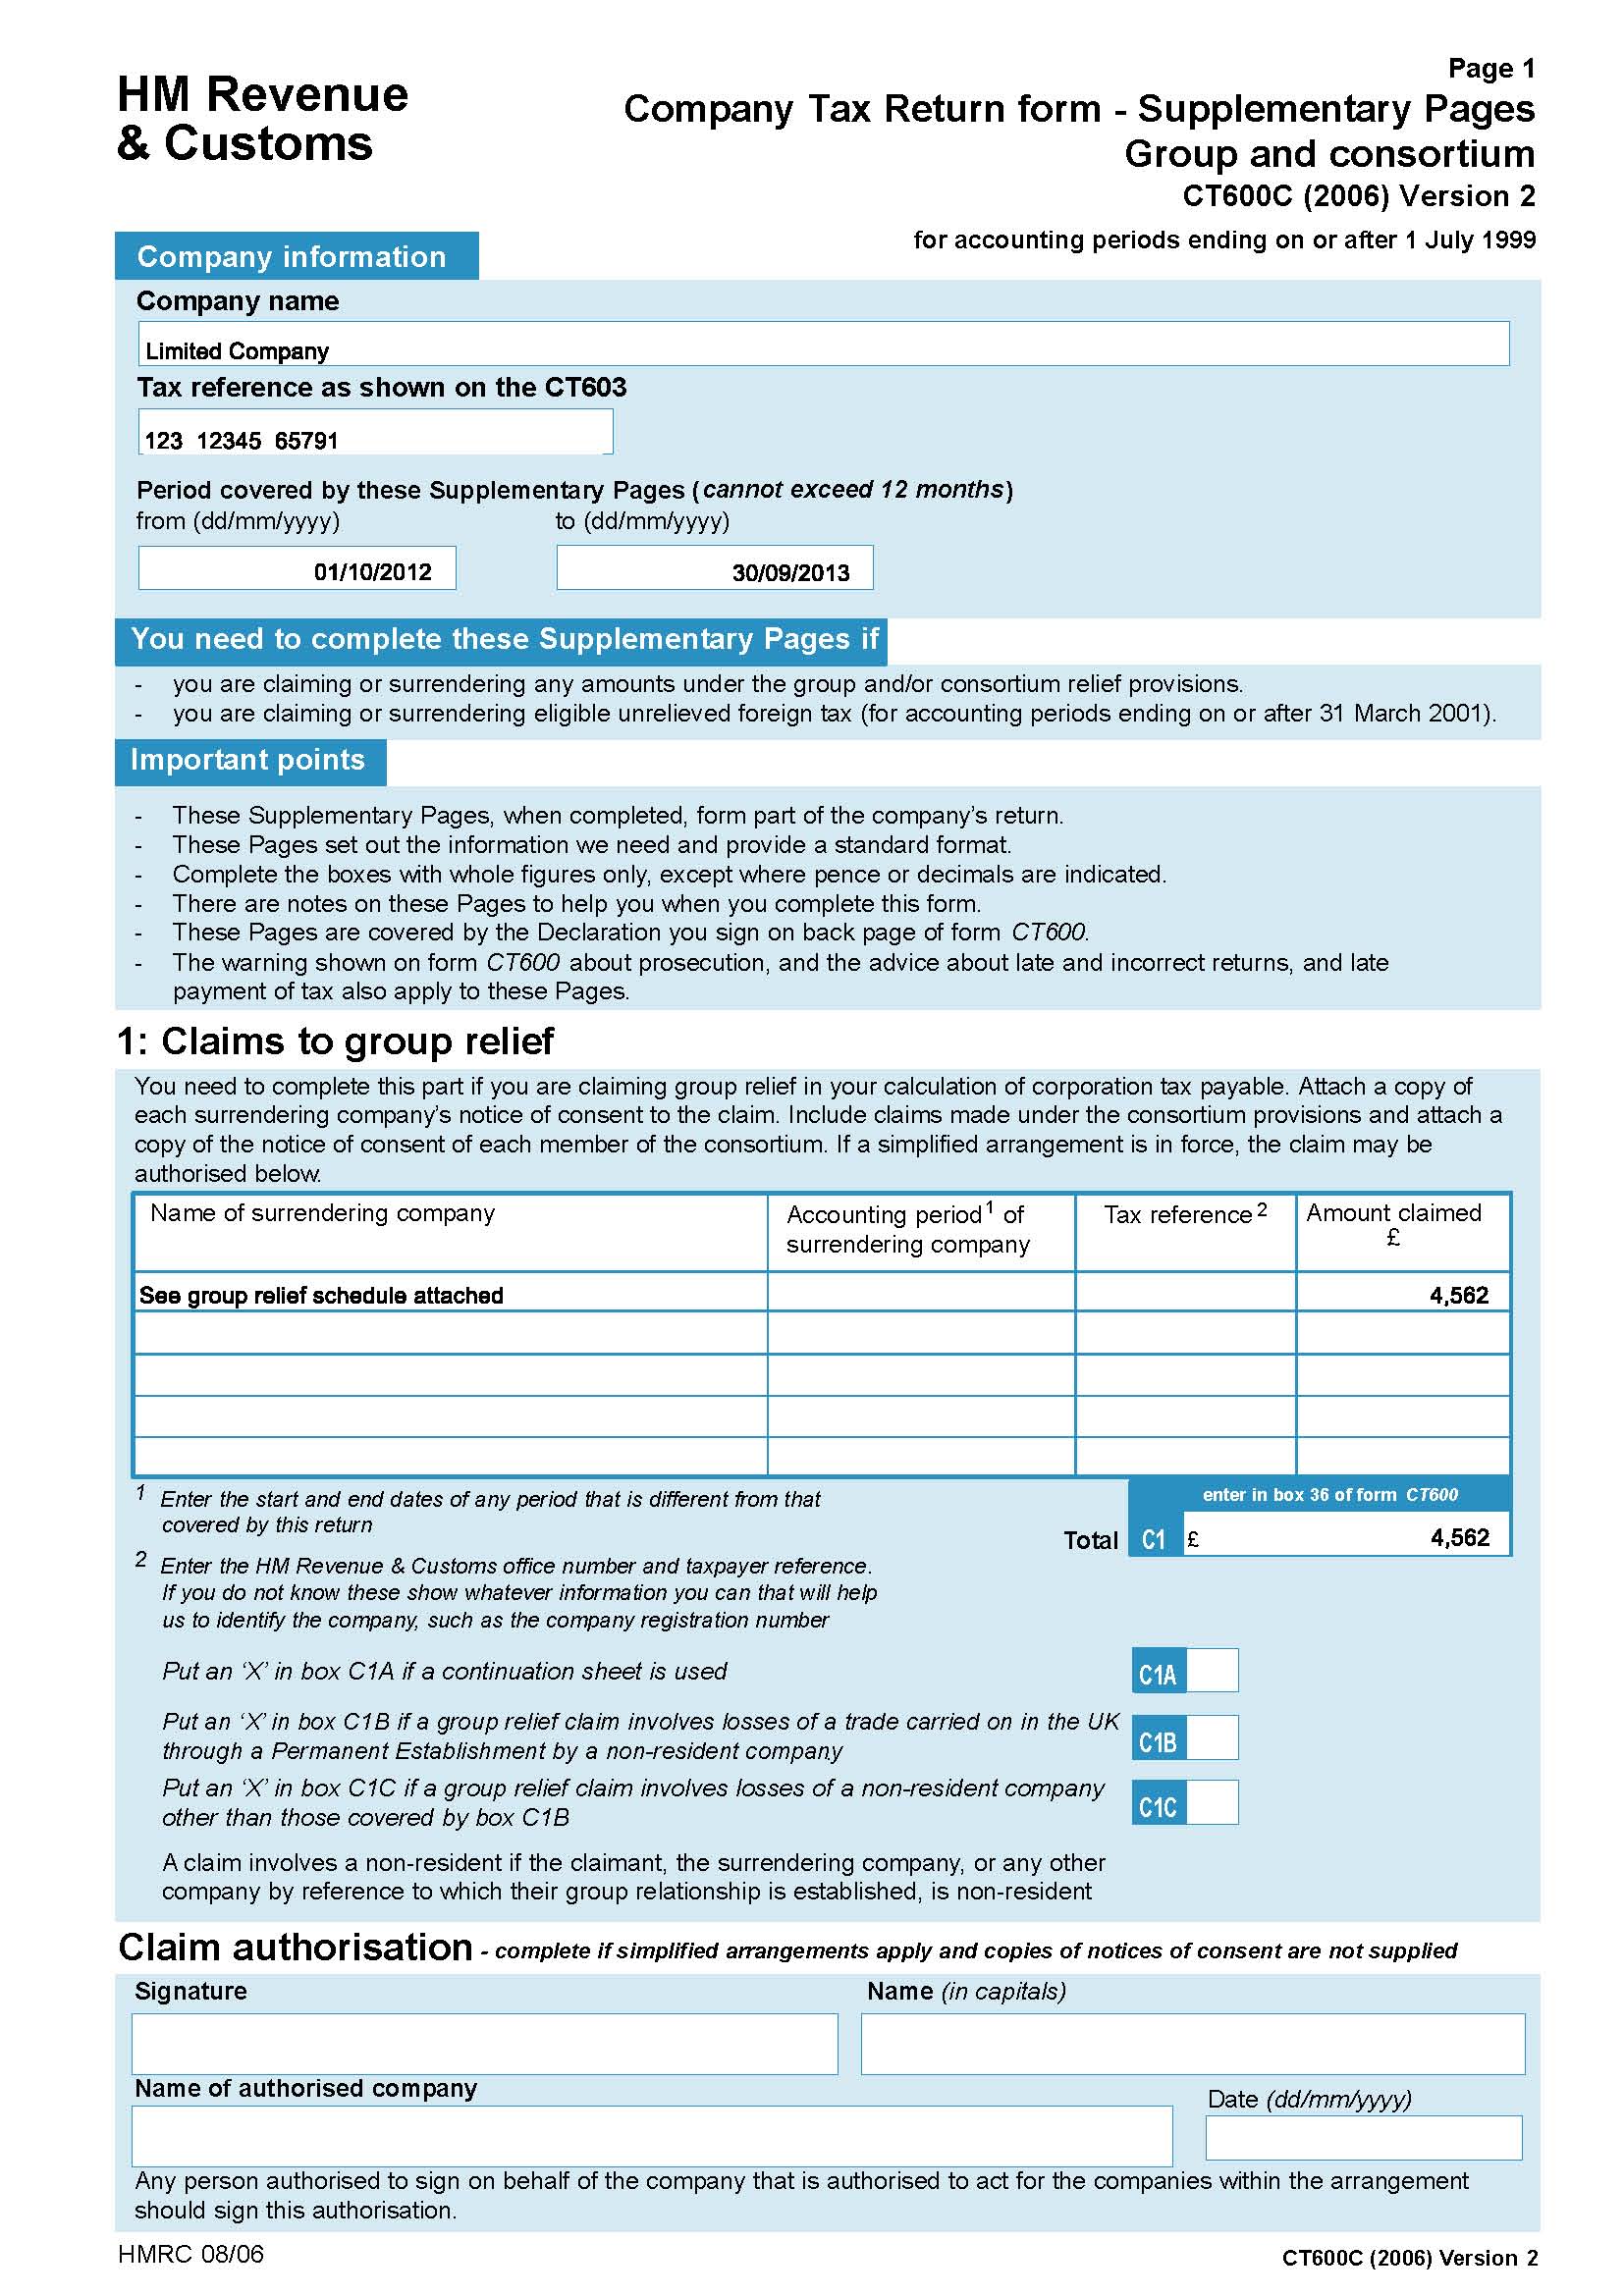 hmrc-tax-overview-online-self-document-templates-documents